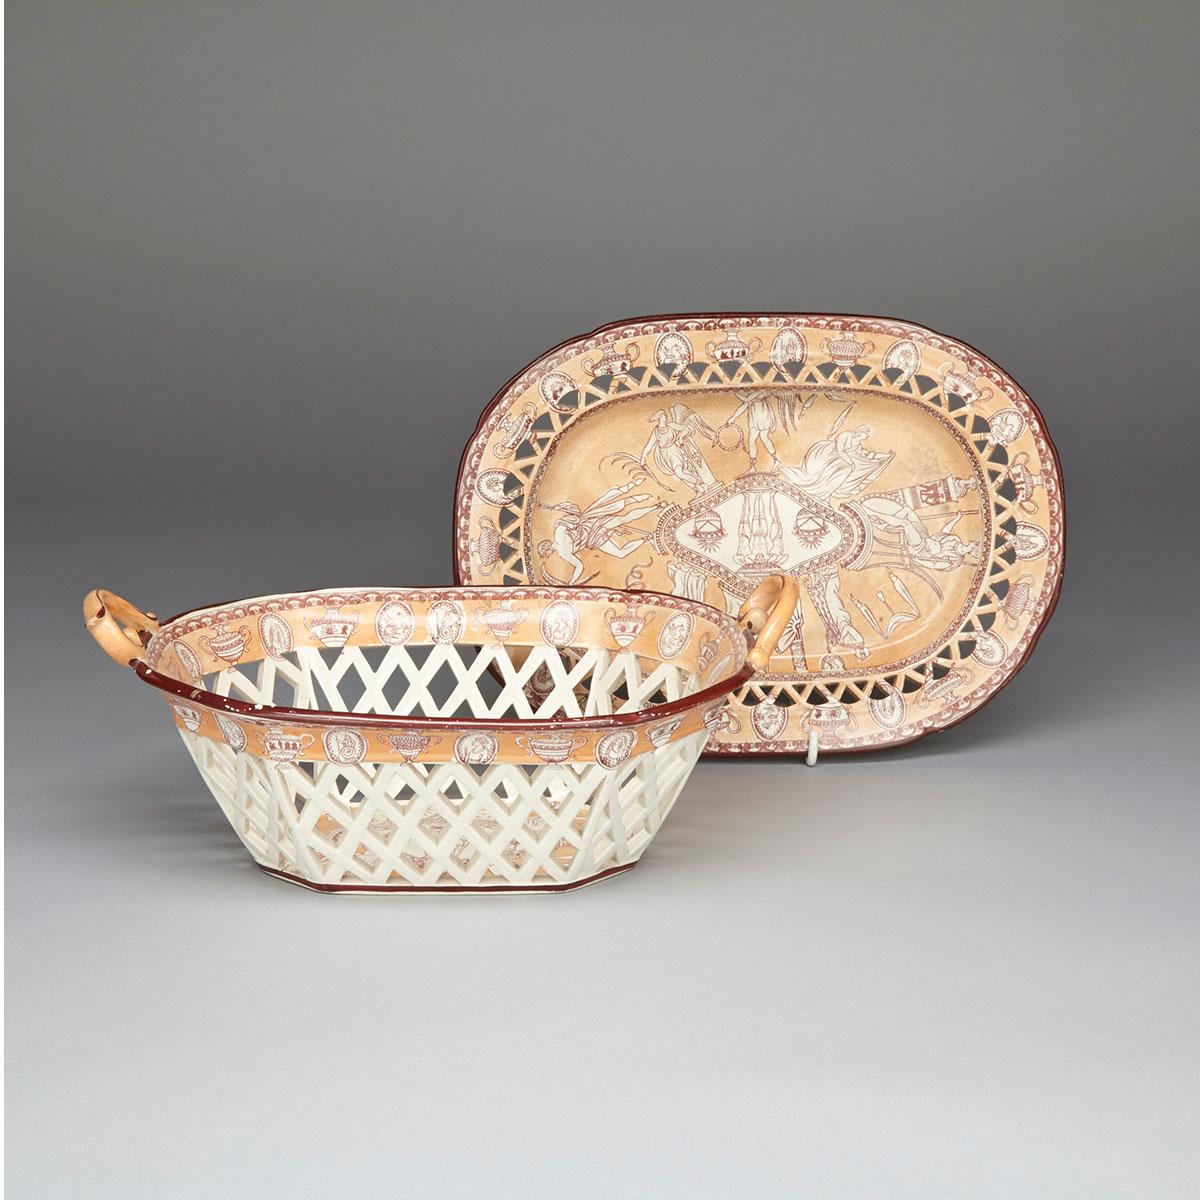 English Pearlware Oblong Chesnut Basket and Stand, c.1800